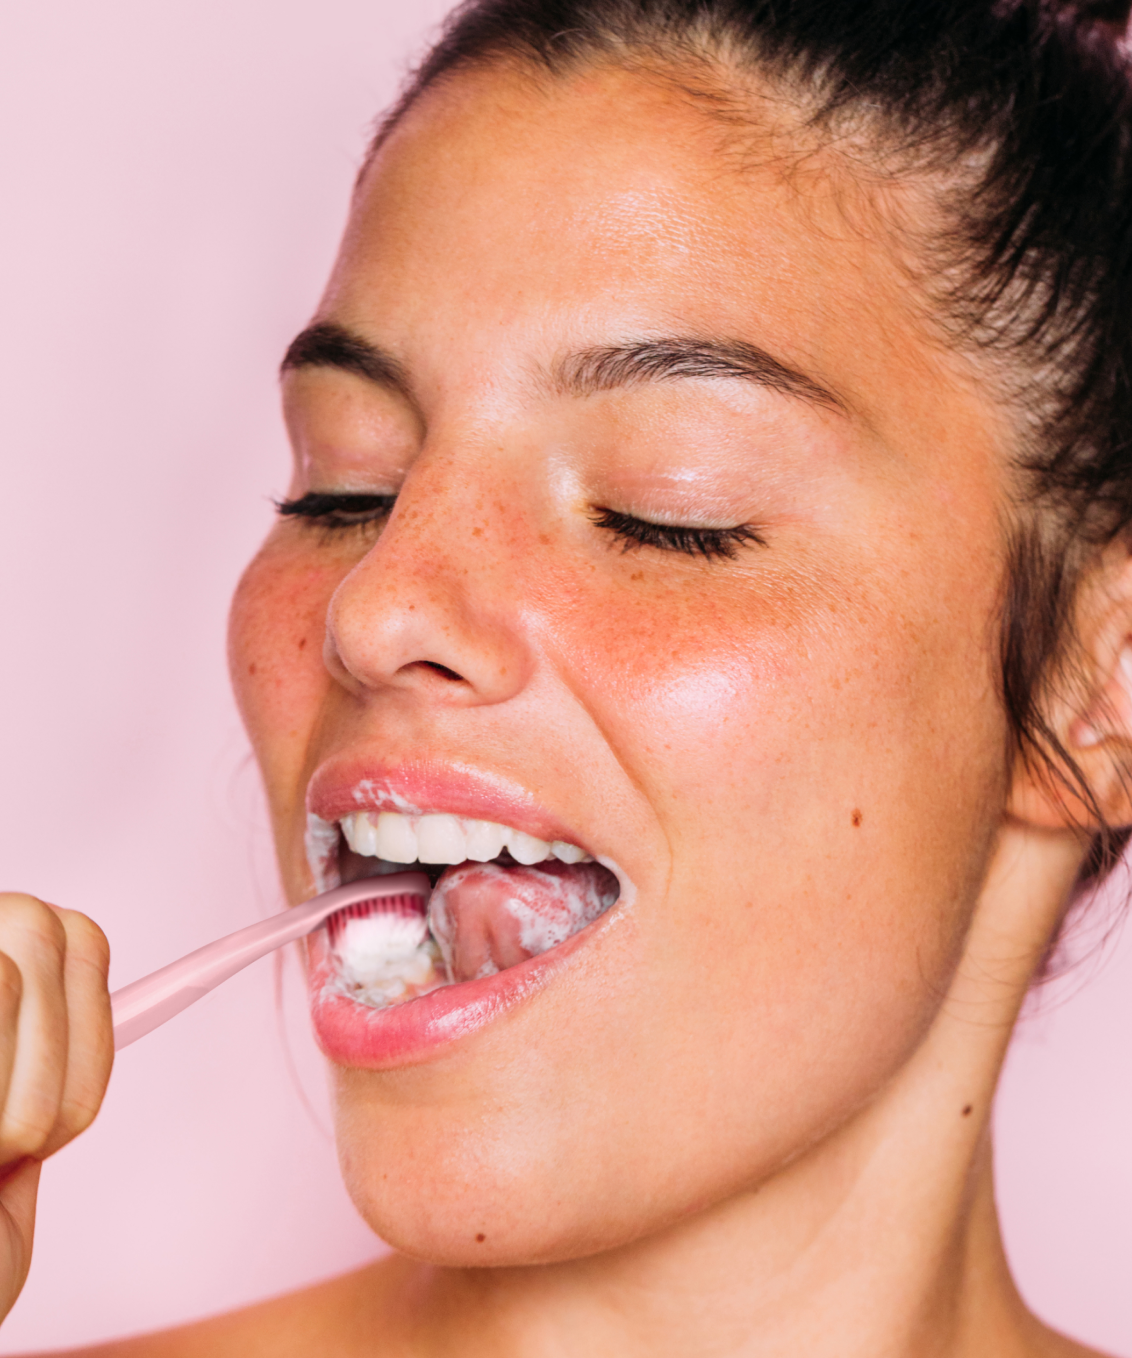 A slightly smiling model with her eyes closed brushing her teeth with a pink Euthymol Whitening Toothbrush